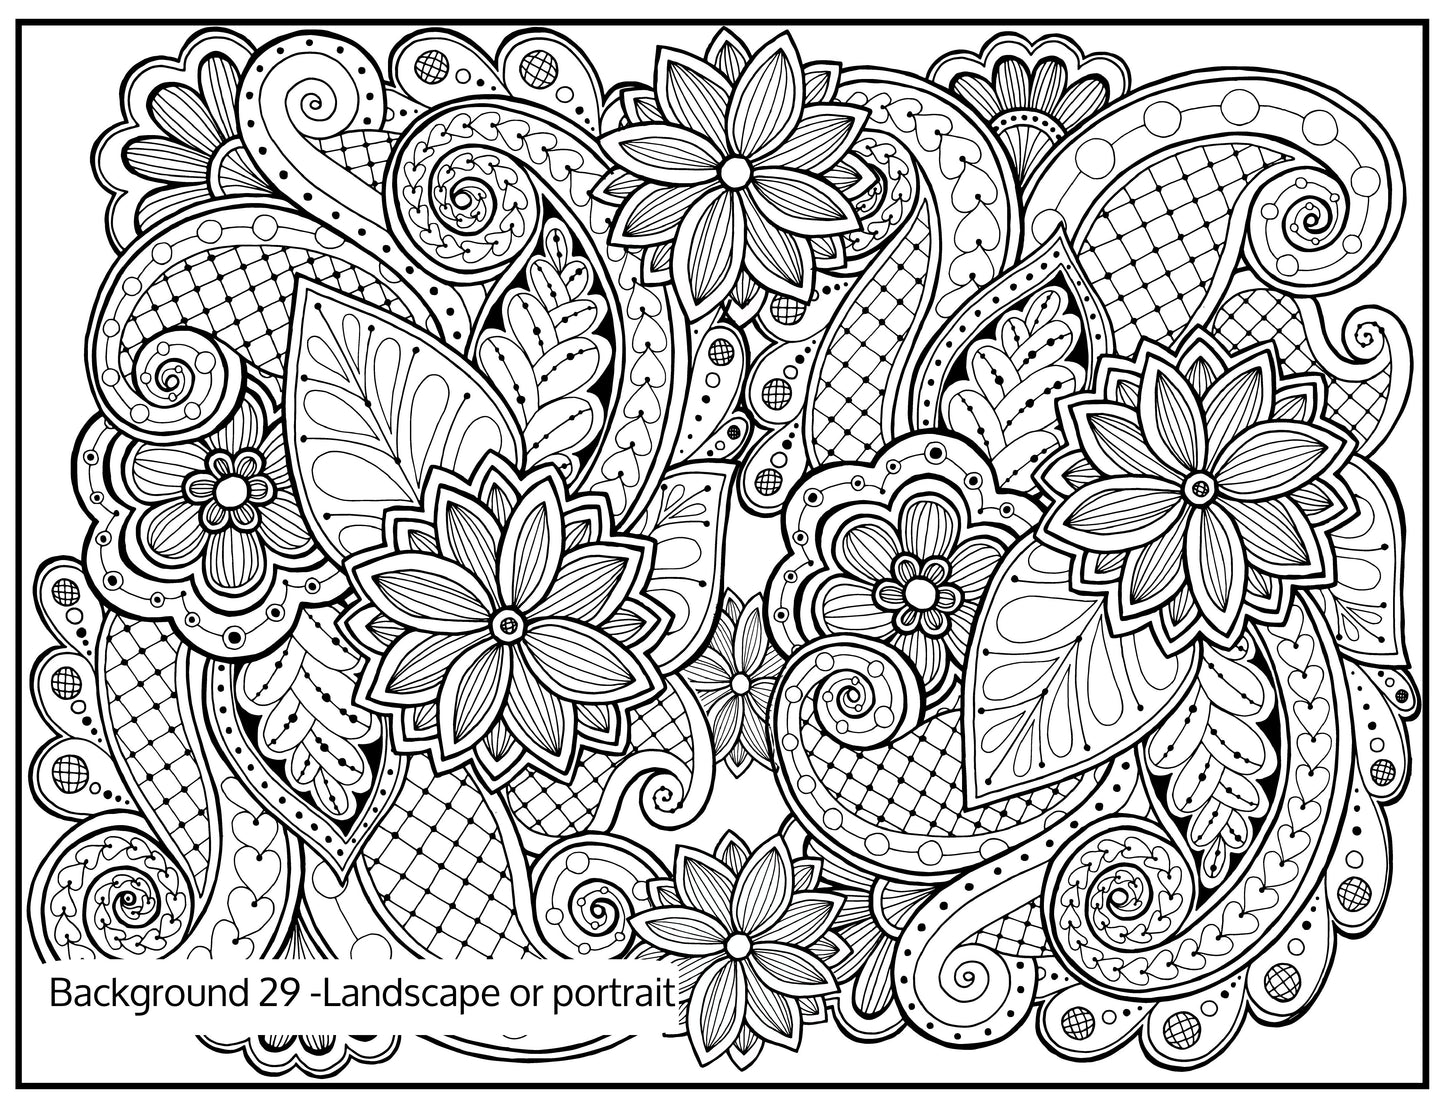 Background 29 Custom Personalized Giant Coloring Poster 46"x60"